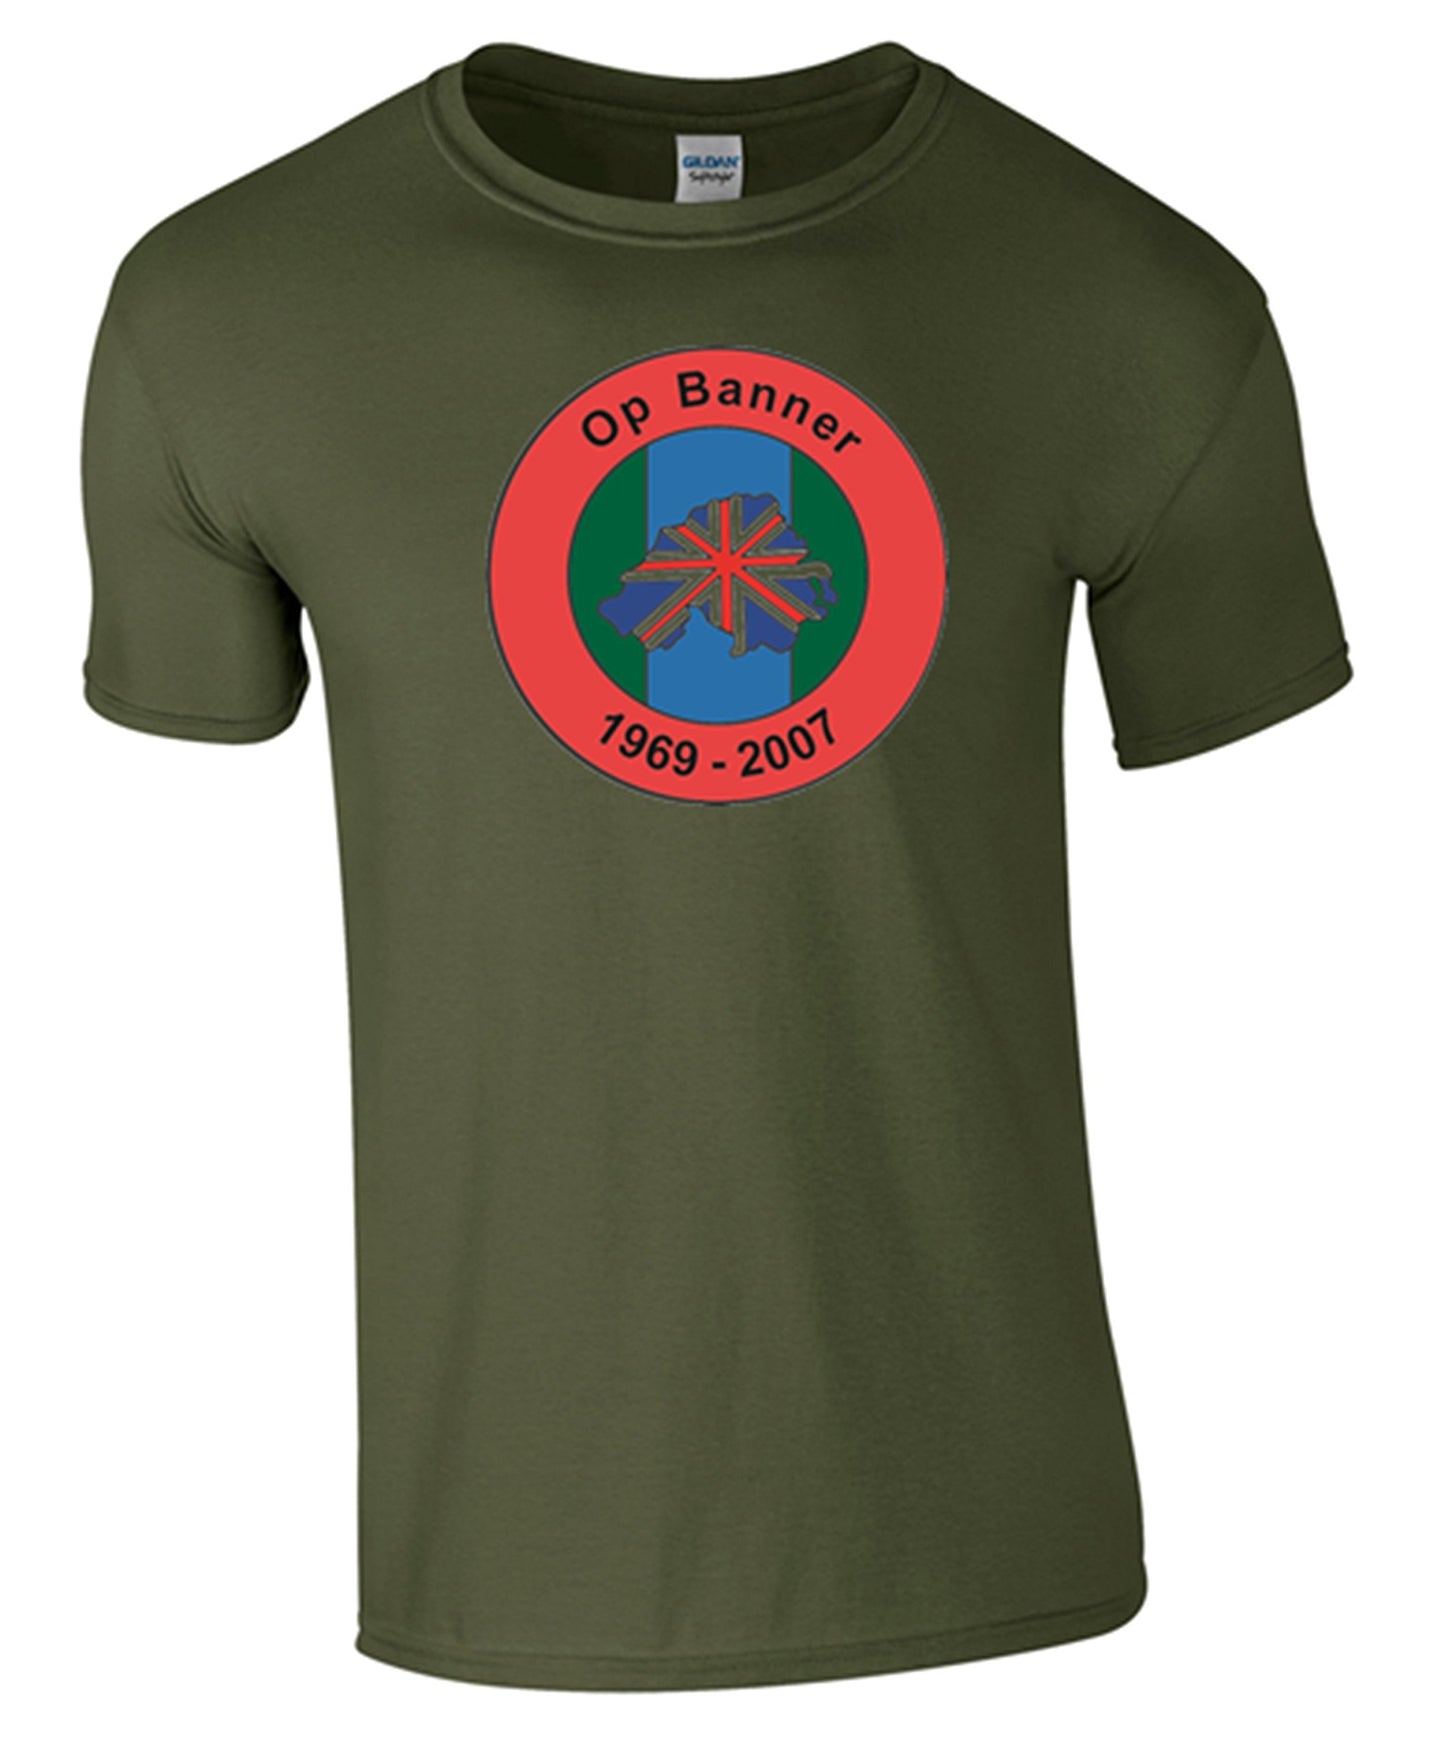 Bear Essentials Clothing. Northern Ireland Ops Banner T-Shirt (XXL, Green) - Army 1157 kit Army 1157 Kit